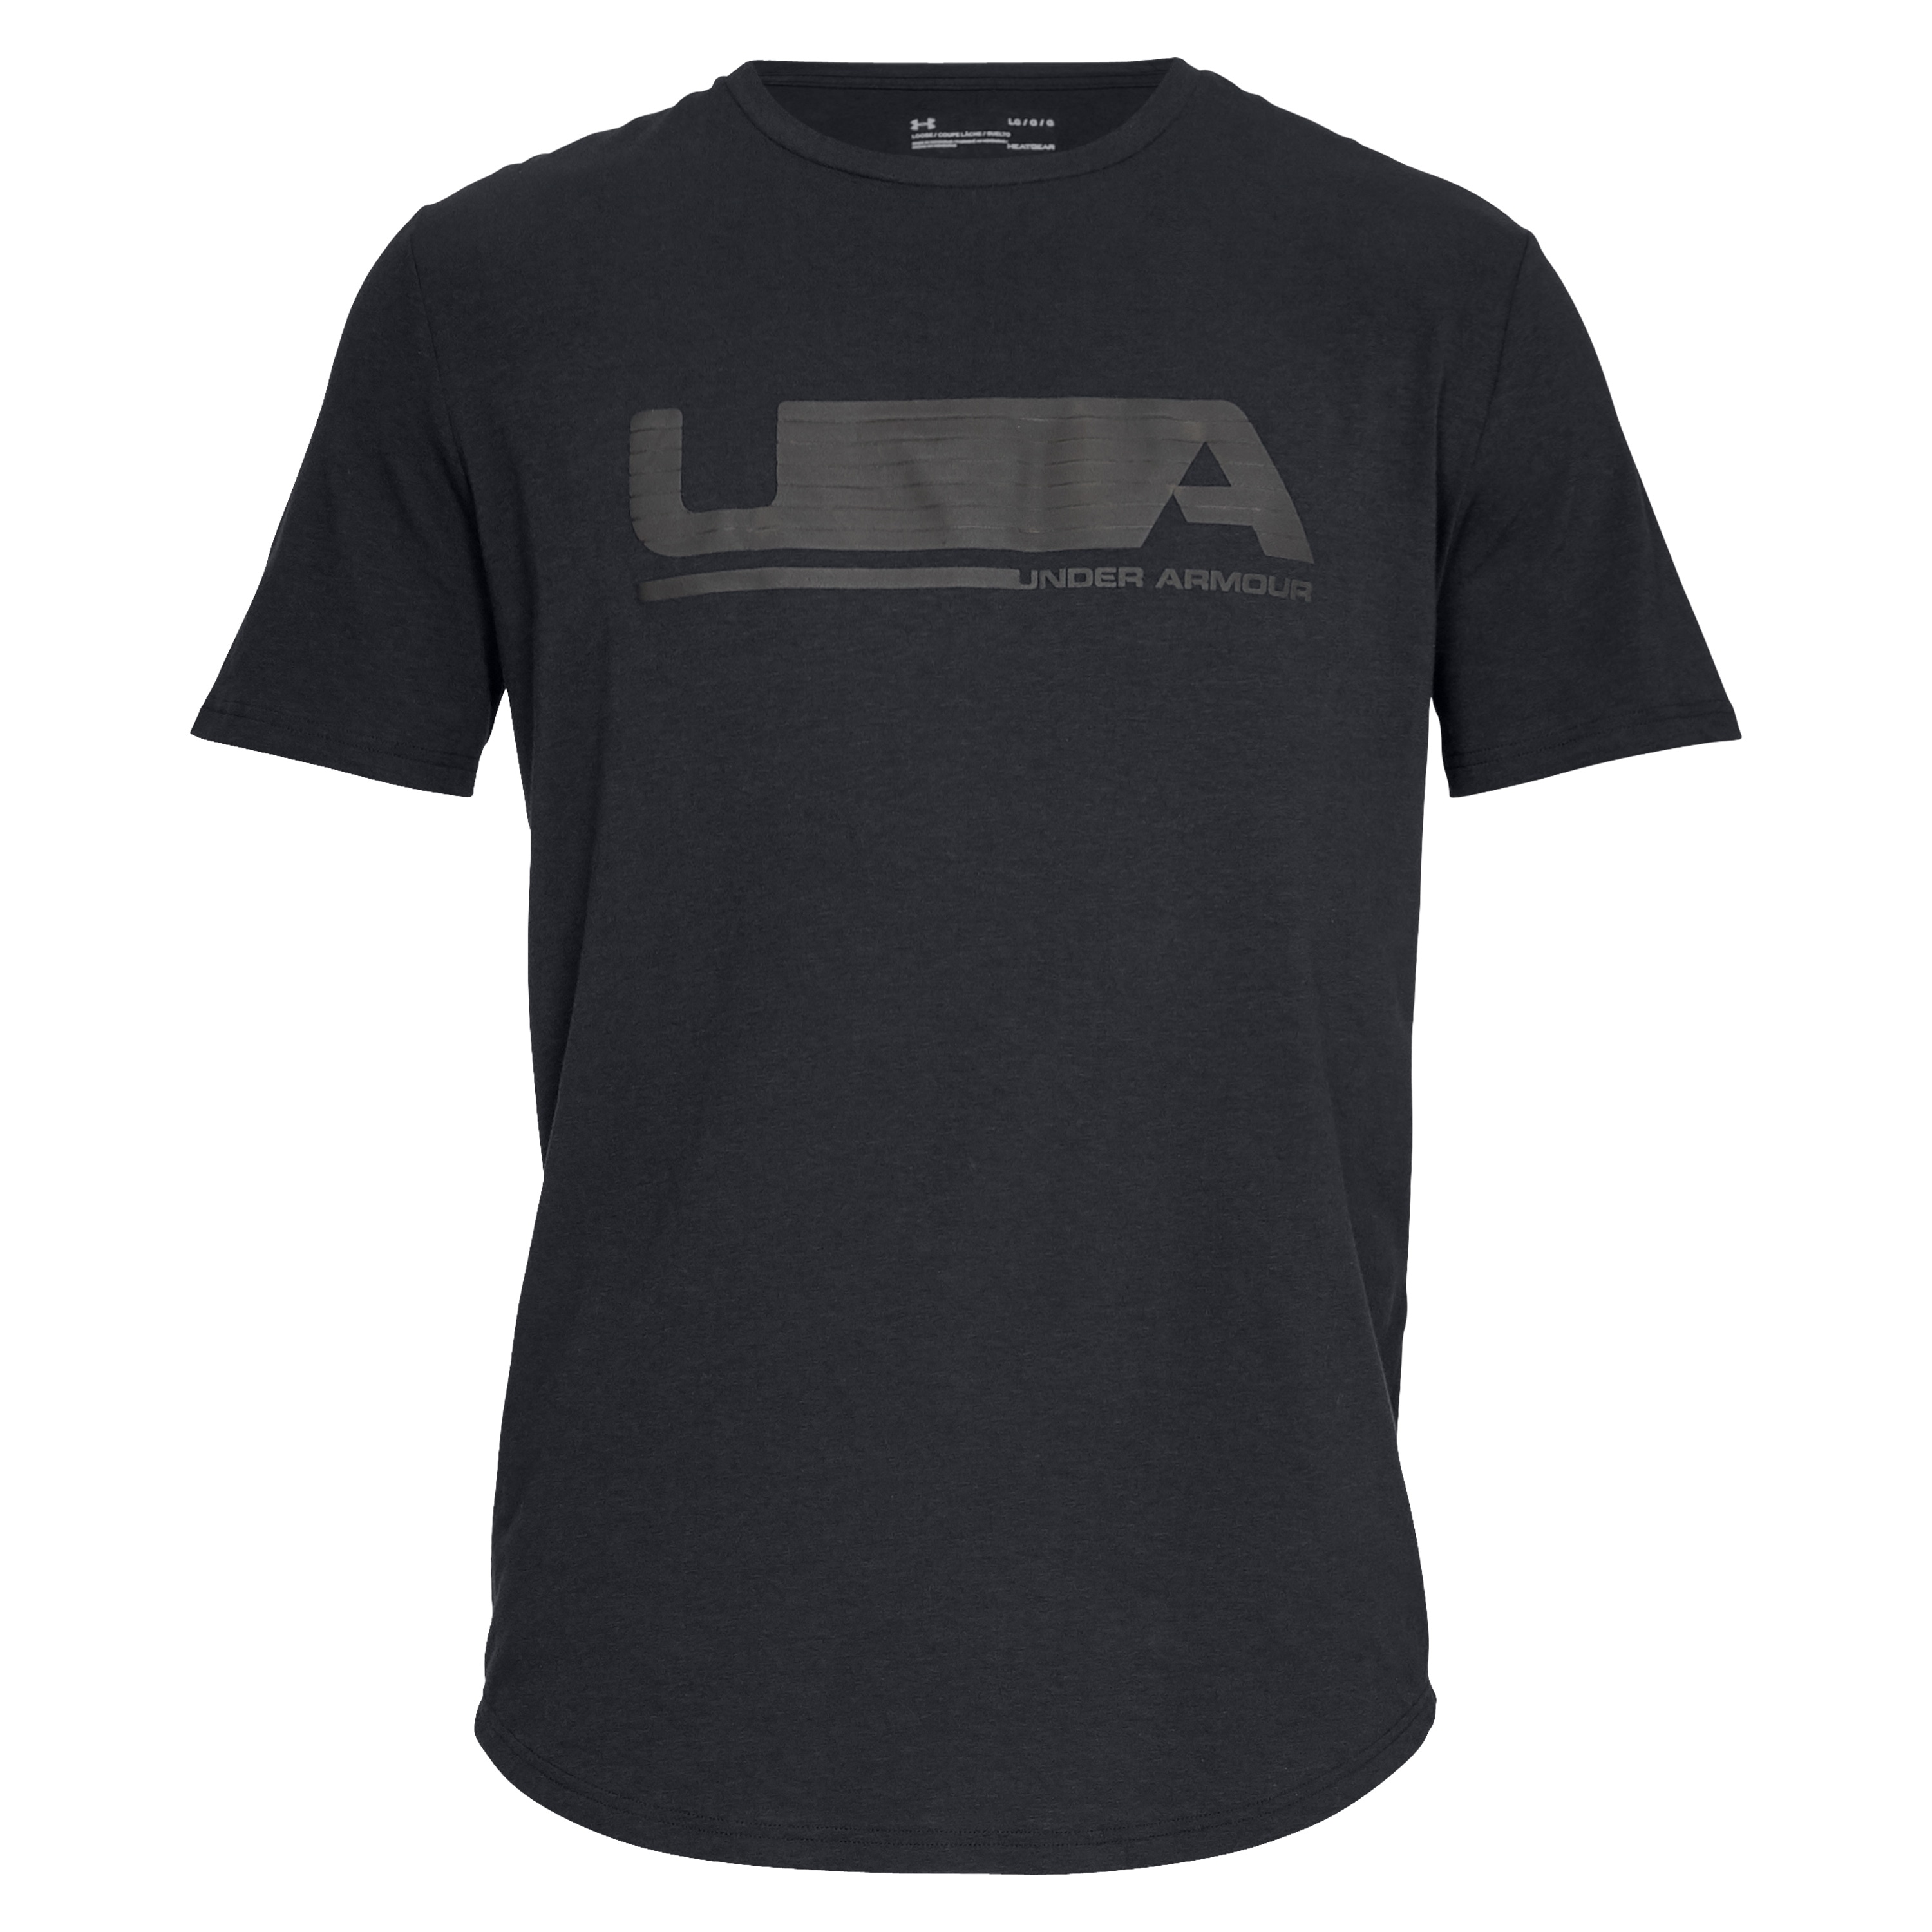 Purchase the Under Armour Shirt Versa Tee black by ASMC